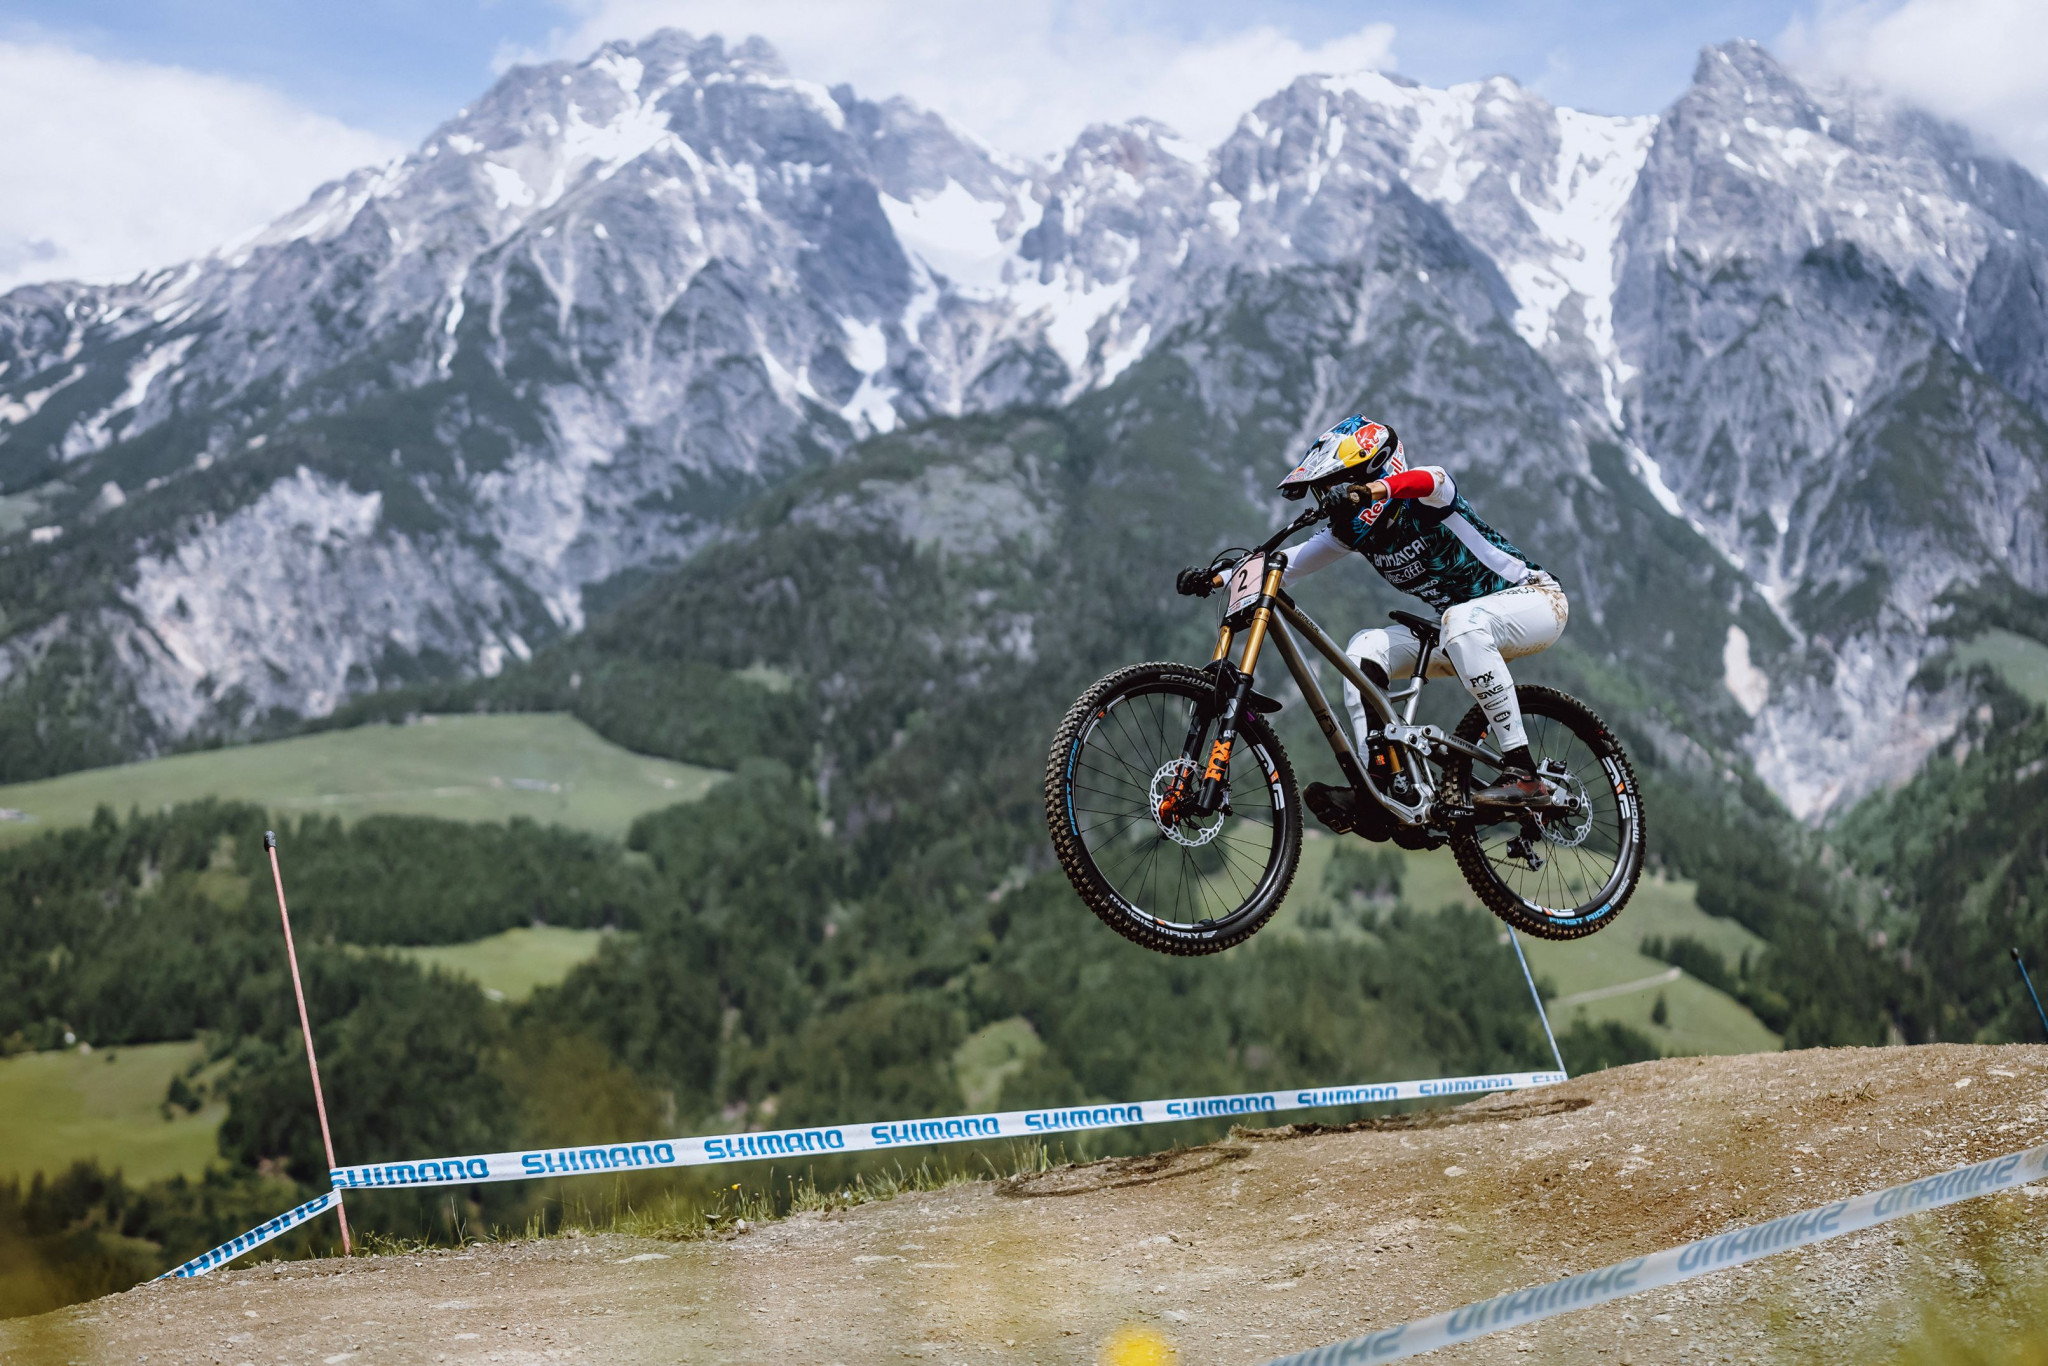 French downhill double at UCI Mountain Bike World Cup as Vergier and Nicole claim victories